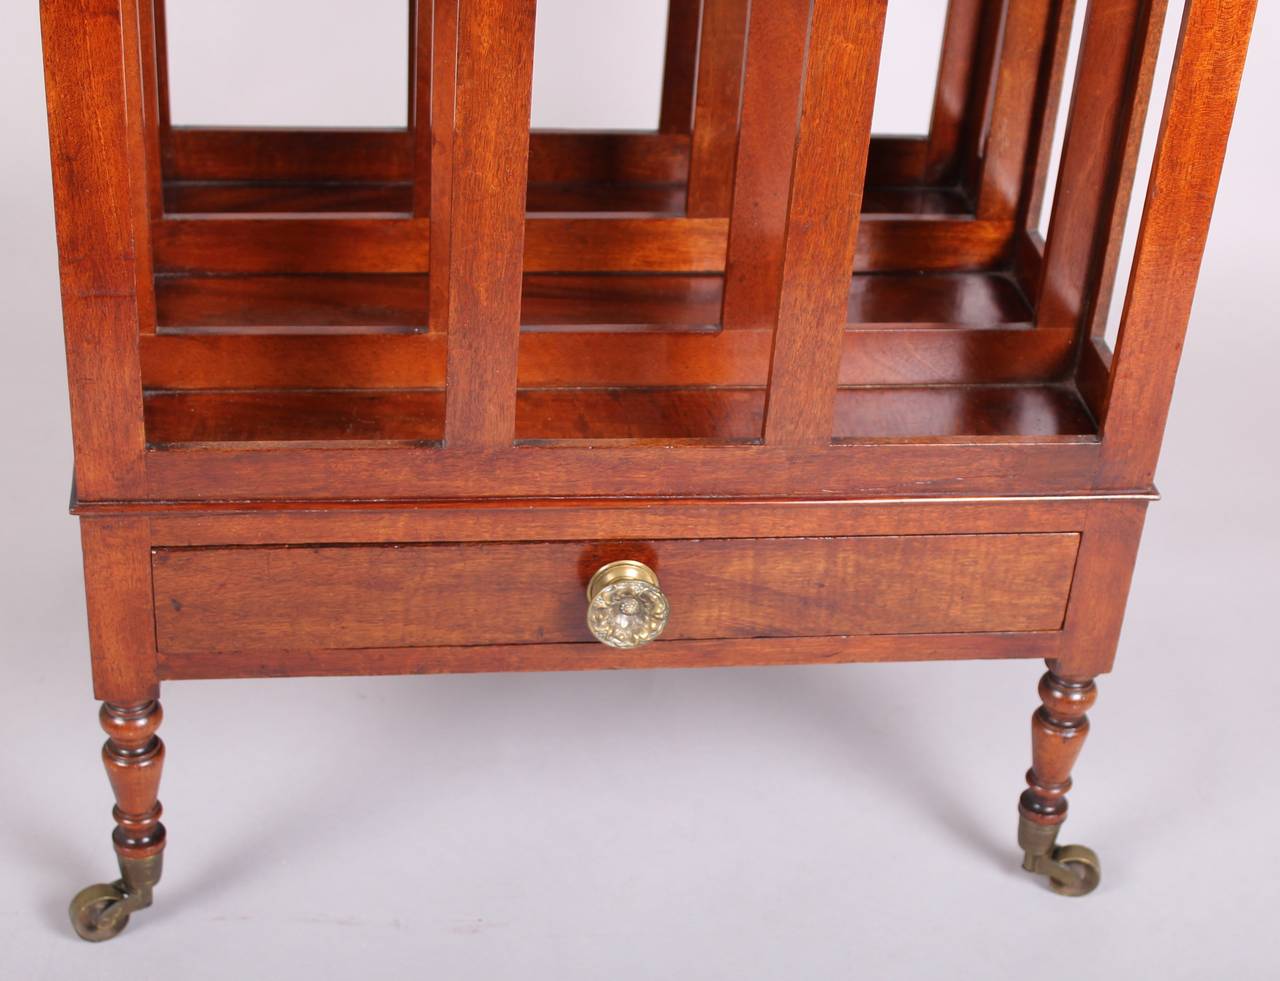 George III period mahogany Canterbury with three compartments and a single drawer, on turned legs with brass cup-castors.